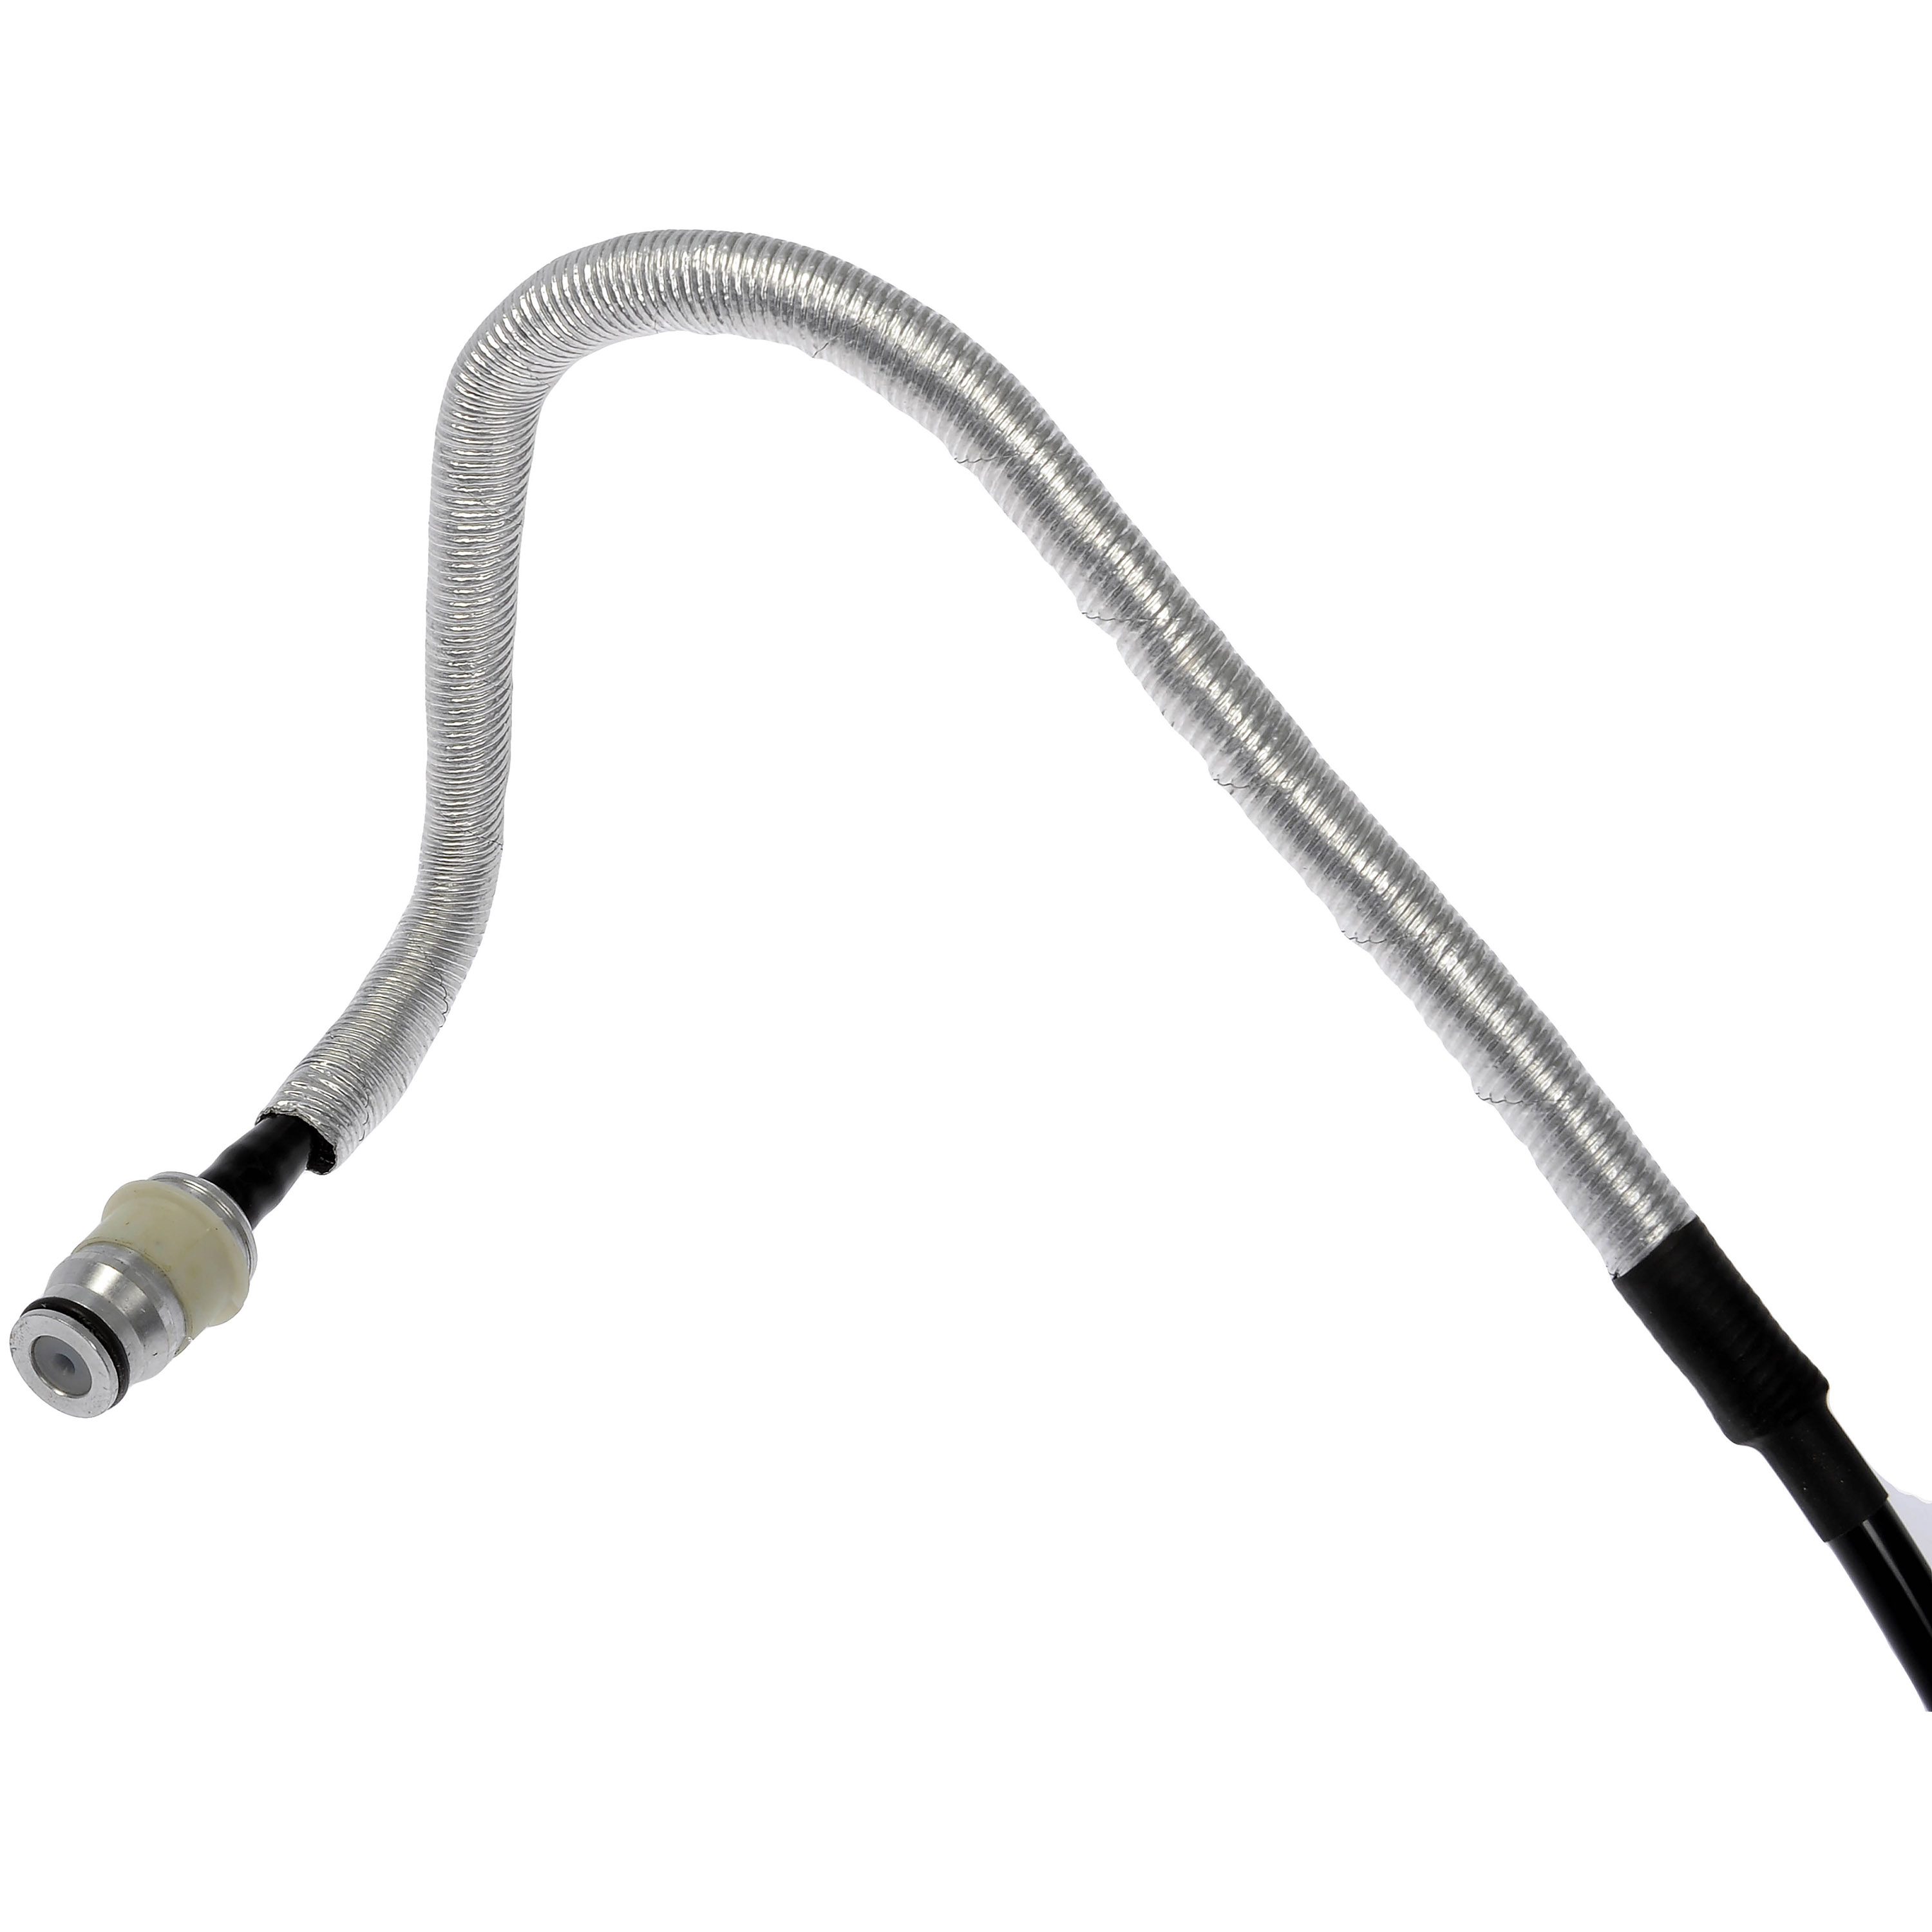 Dorman 628-240 Clutch Hydraulic Line for Specific Ford Models Fits select: 1999-2003 FORD F150, 2004 FORD F-150 HERITAGE - image 3 of 4